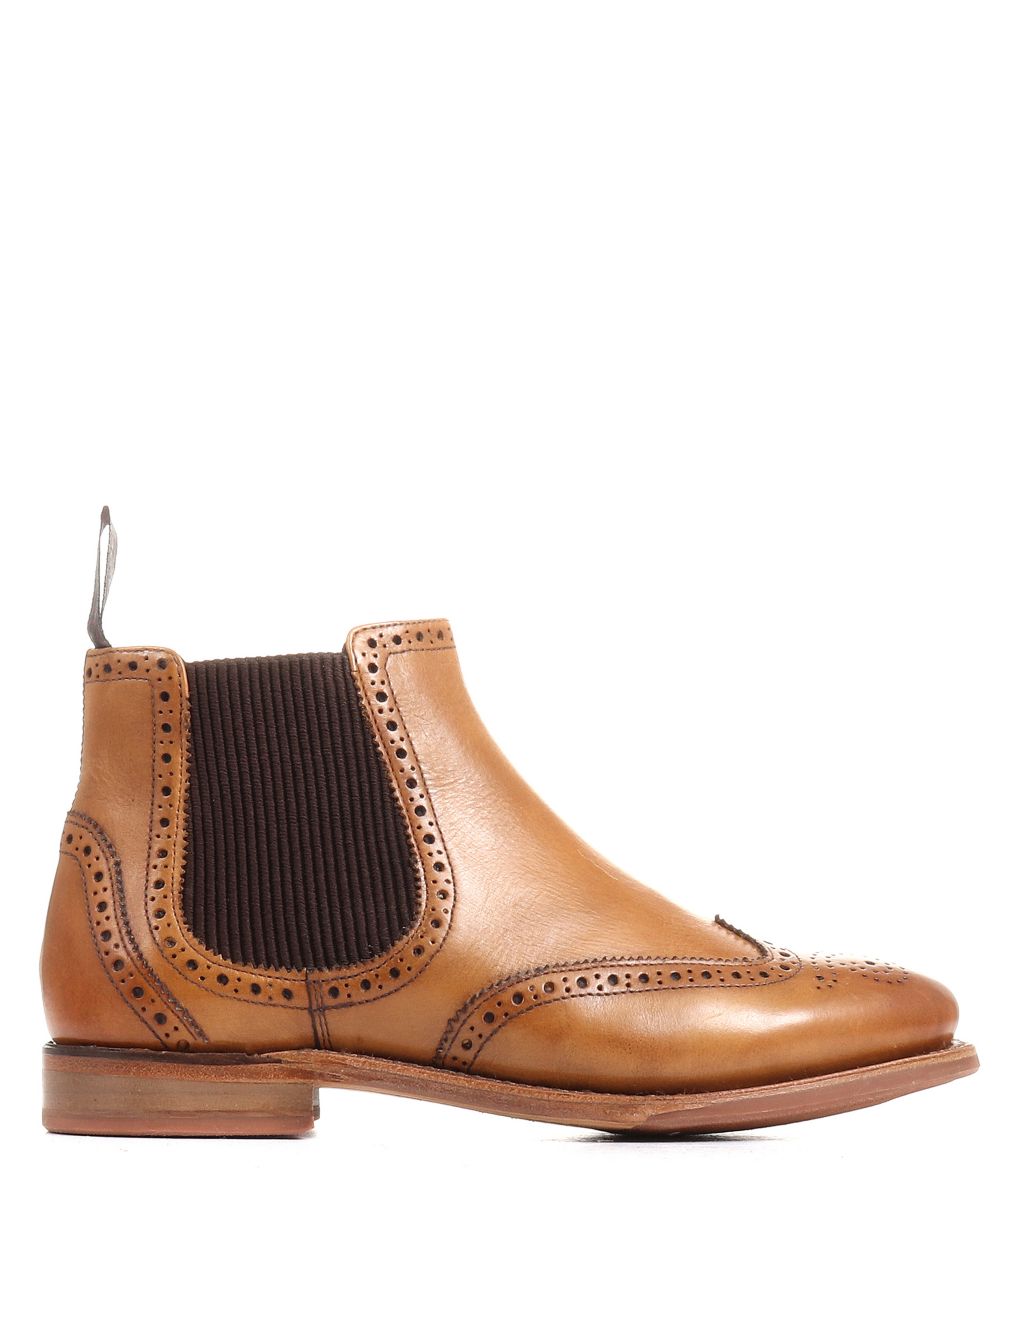 Leather Chelsea Brogue Detail Flat Boots image 1